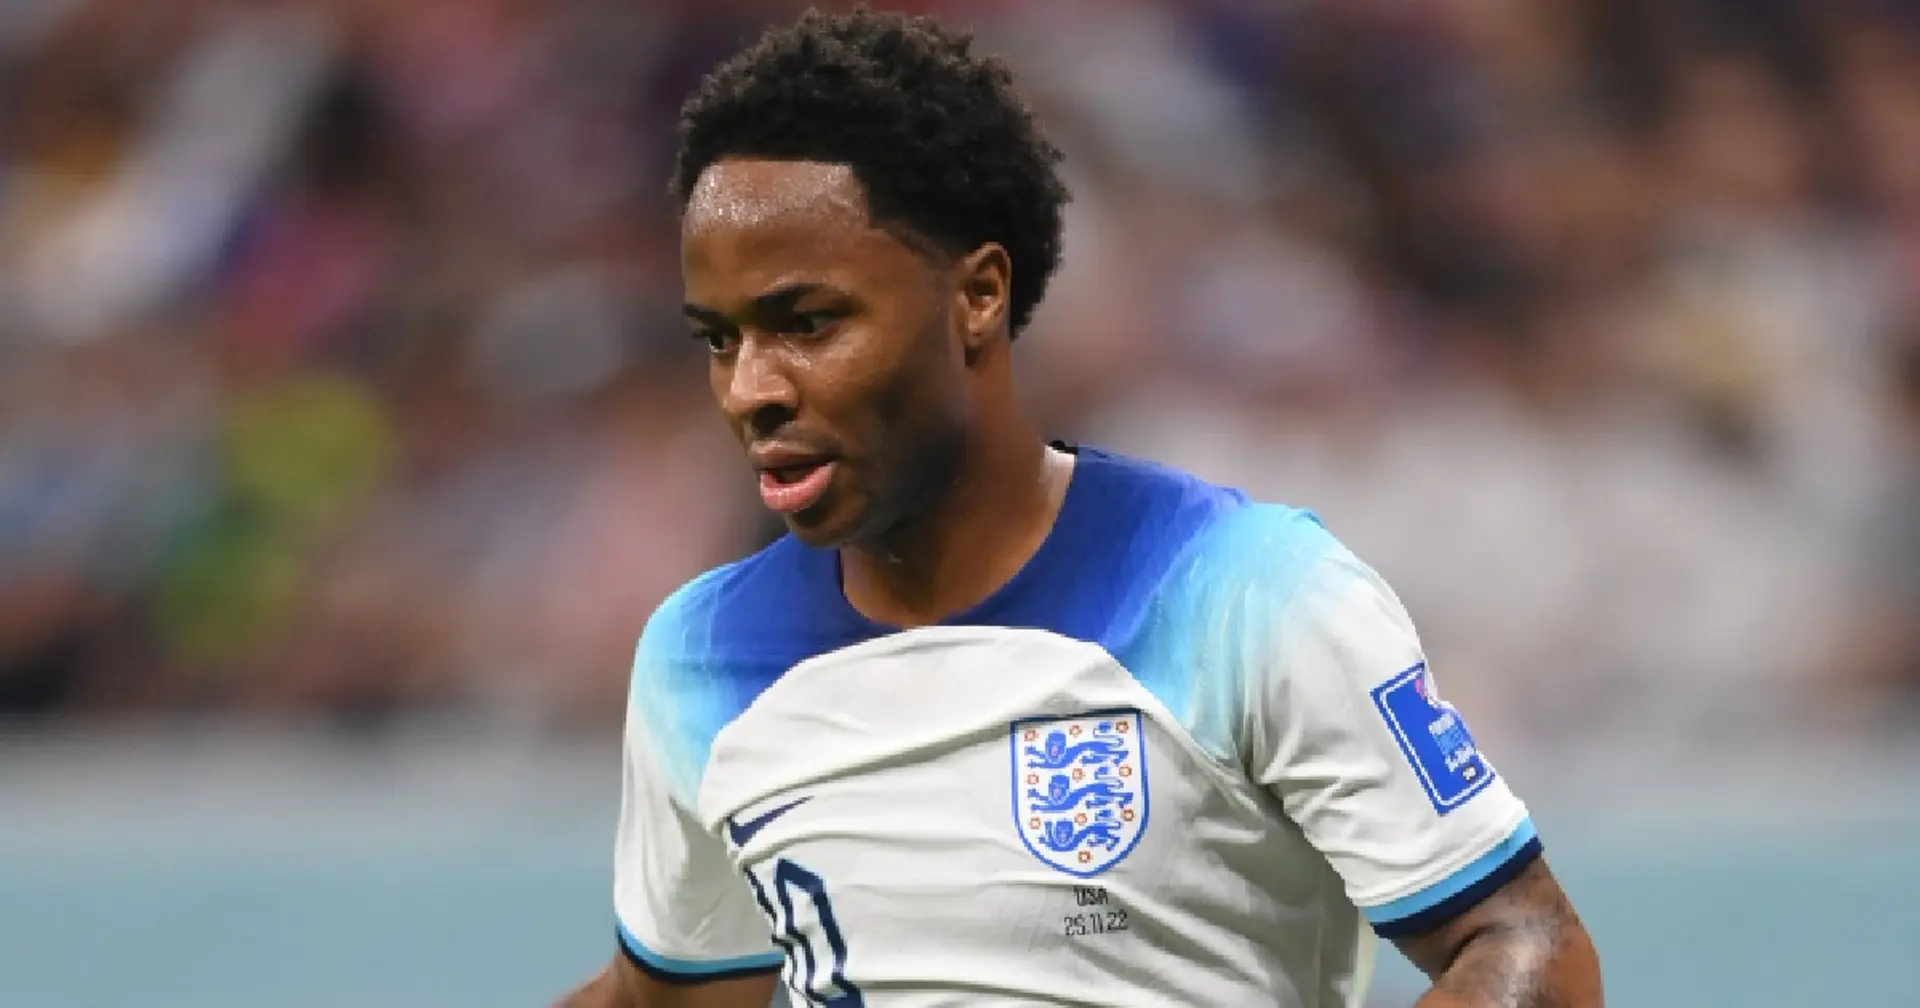 FA confirm Sterling unavailable for selection vs Senegal due to a family matter